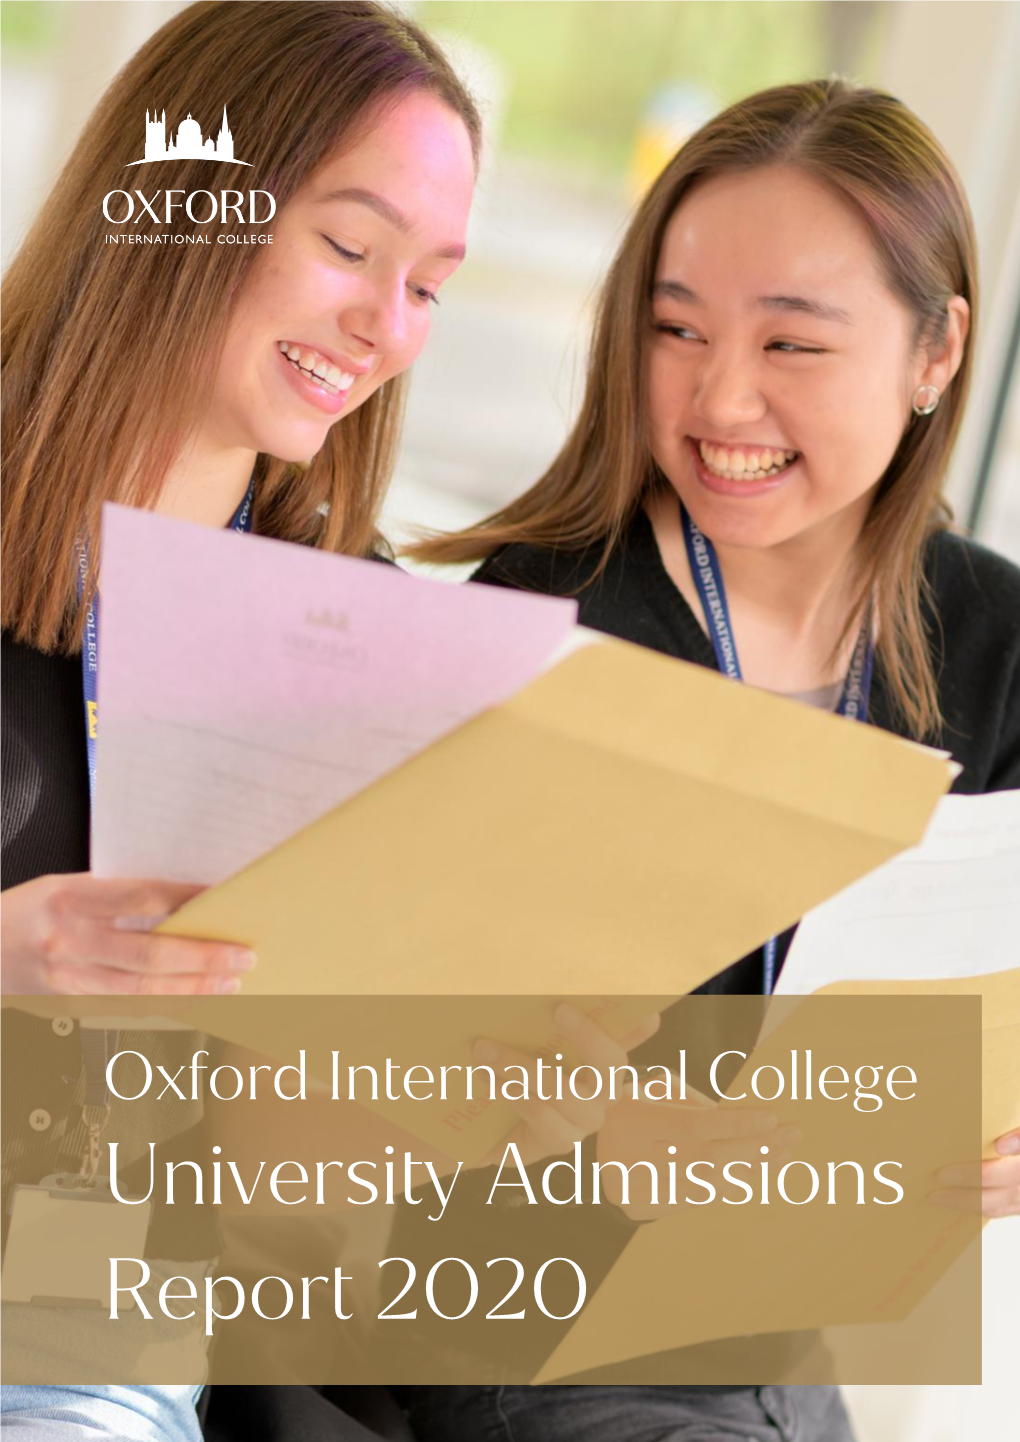 University Admissions Report 2020 2020 Has Been Another Splendid Year for Oxford International College in Terms of University Admissions